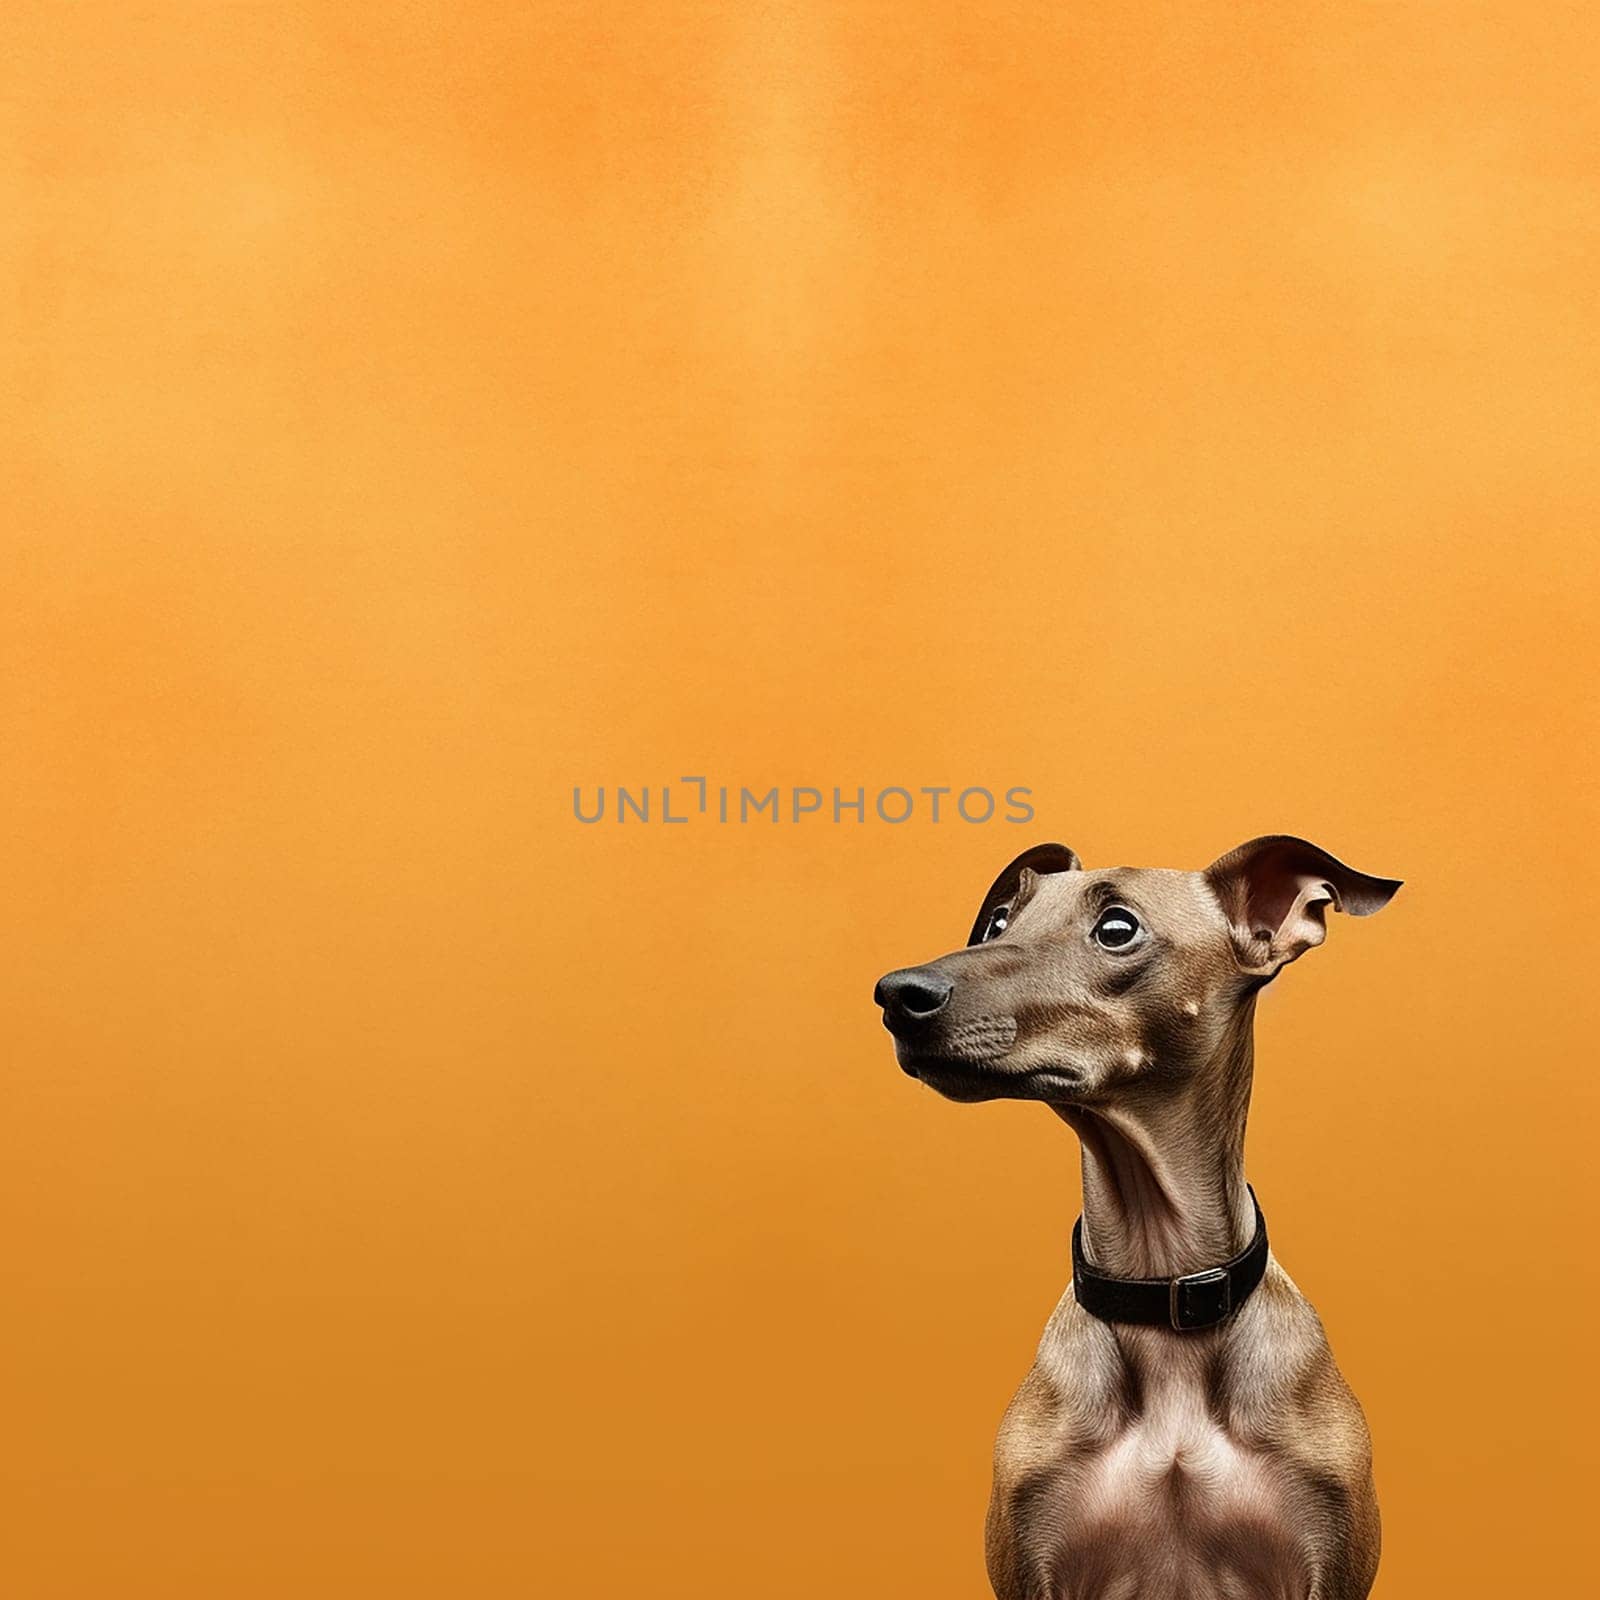 A happy and funny dog, neutral background by Hype2art